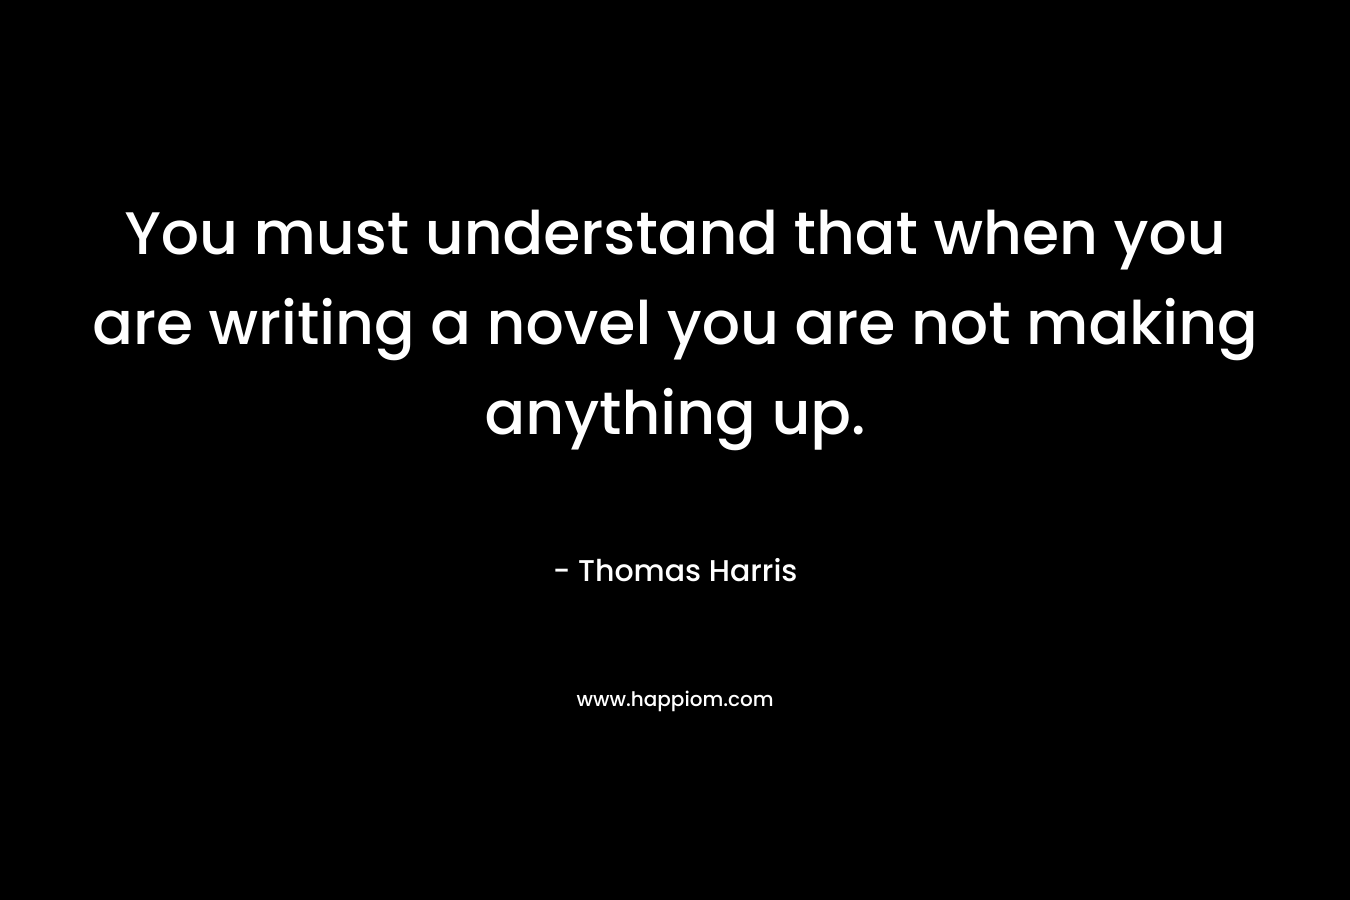 You must understand that when you are writing a novel you are not making anything up.